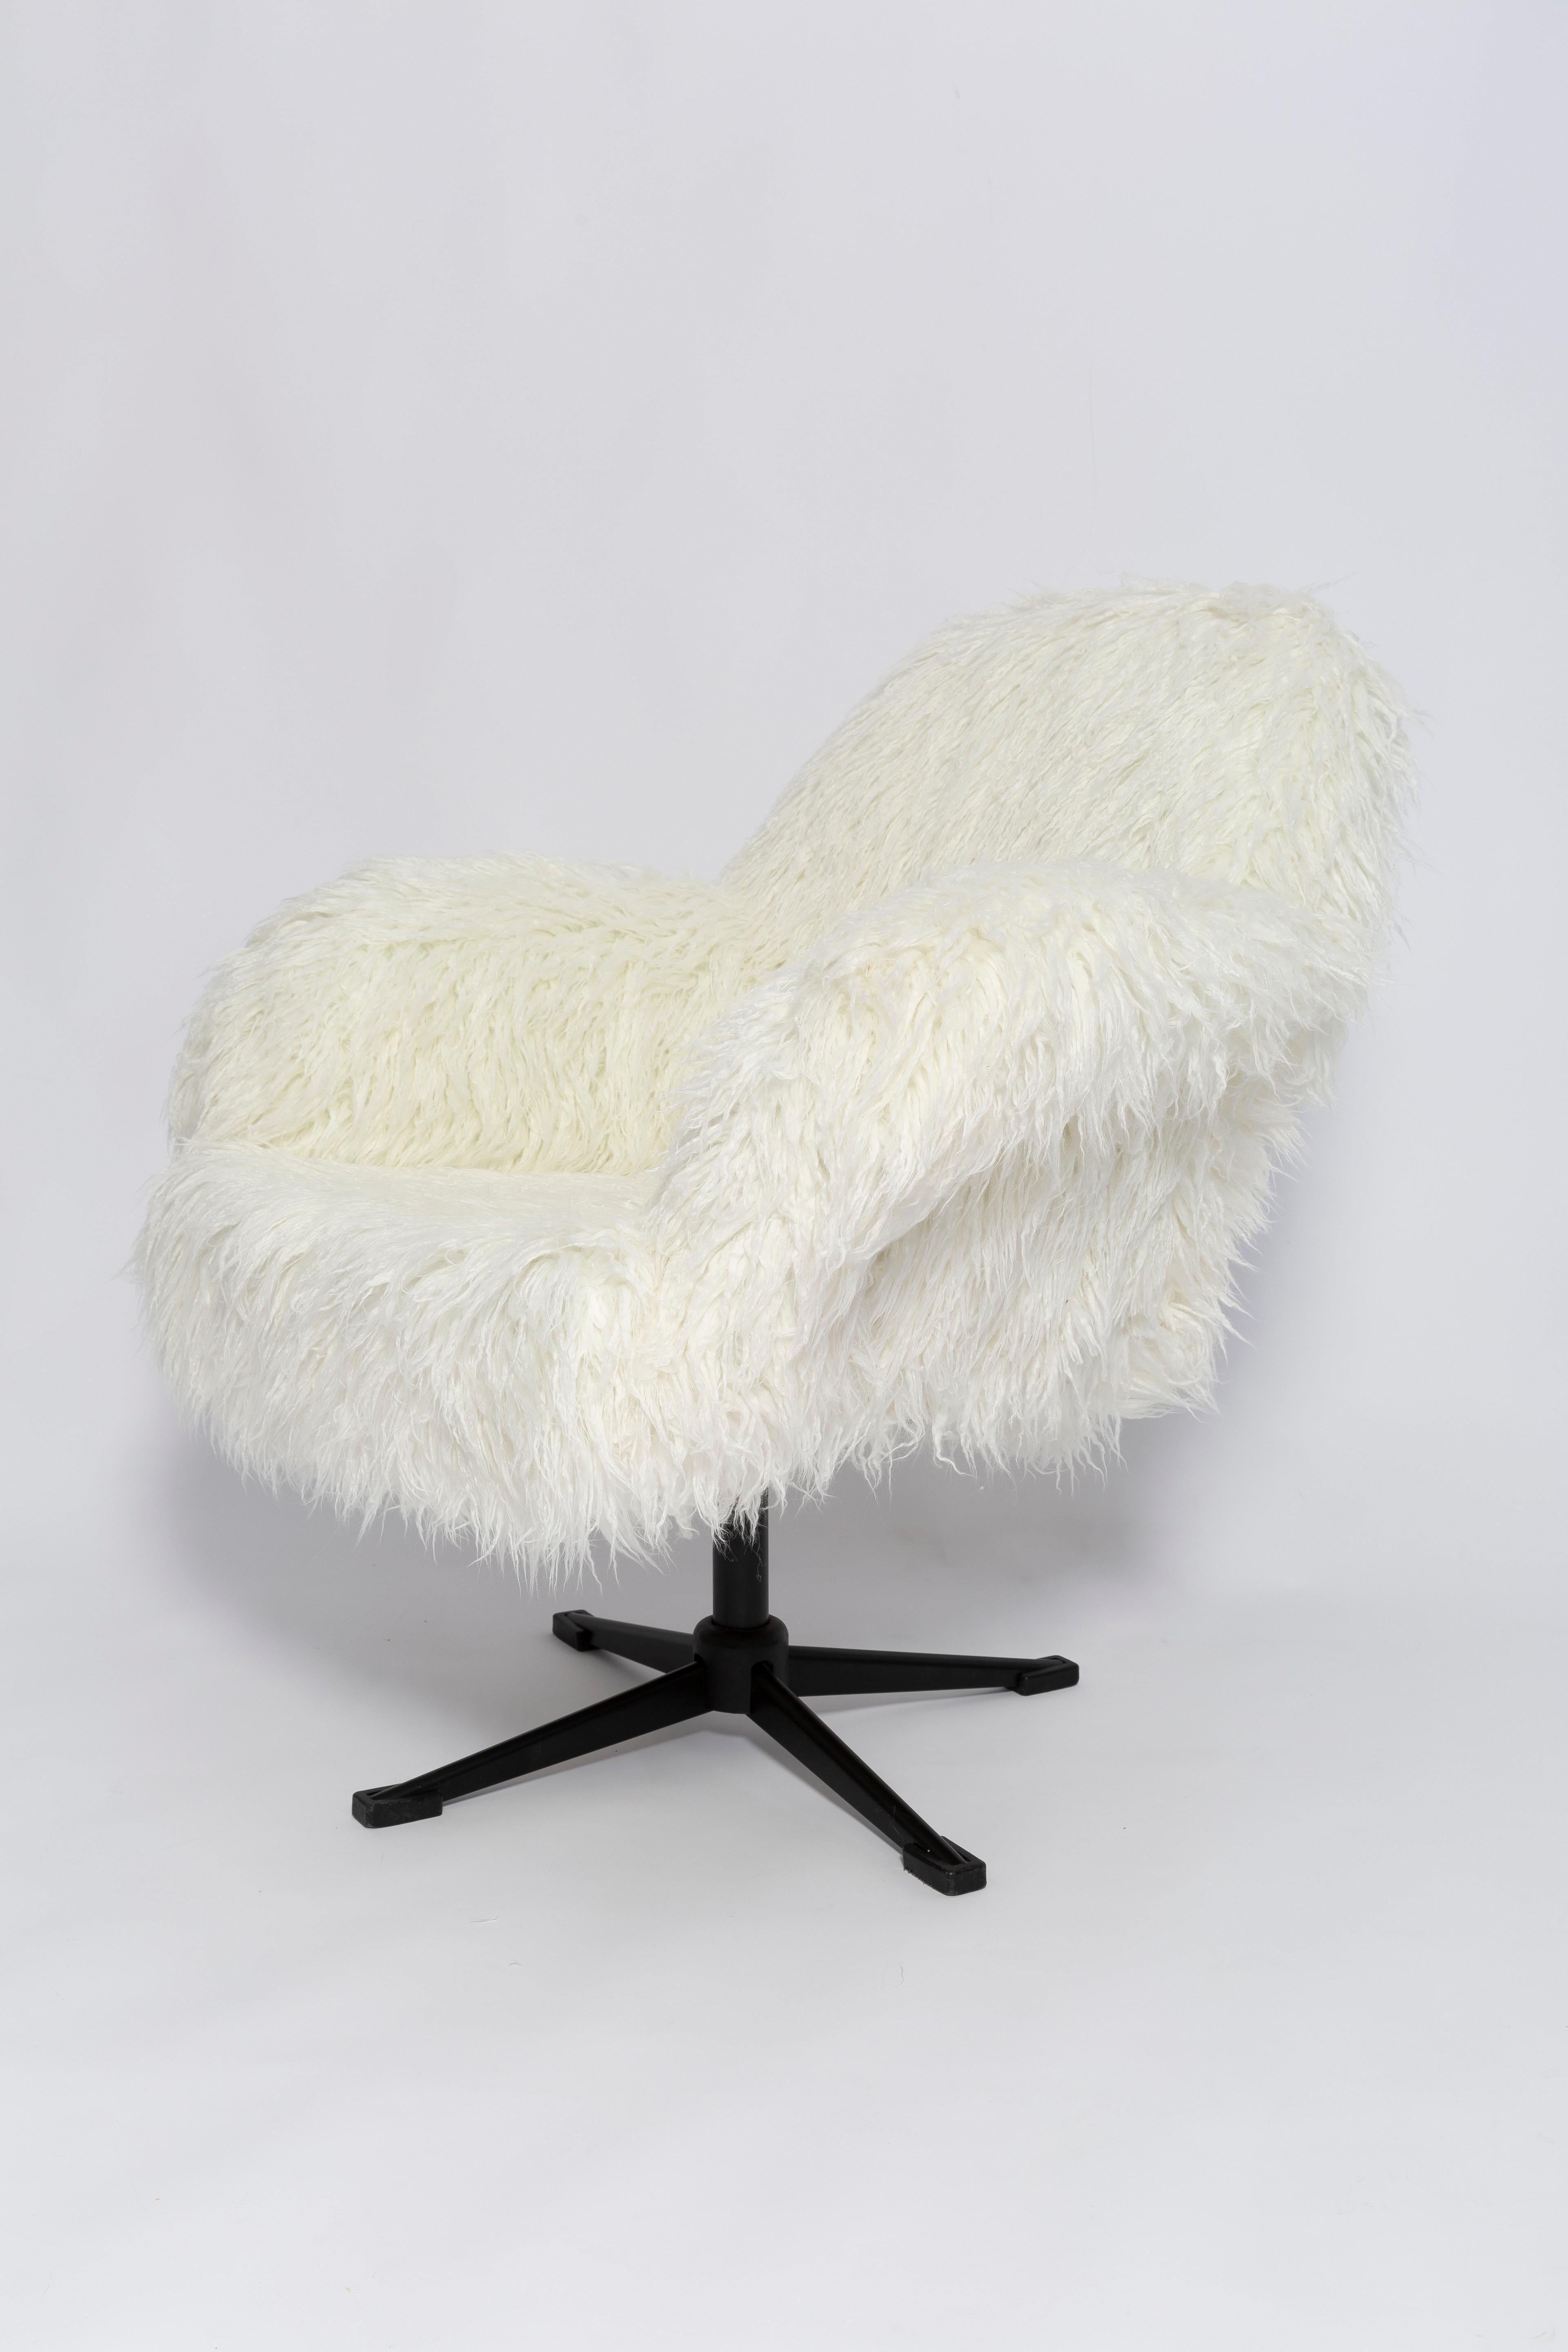 Pair of 20th Century Vintage White Faux Alpaca Hair Swivel Armchairs, 1960s For Sale 3